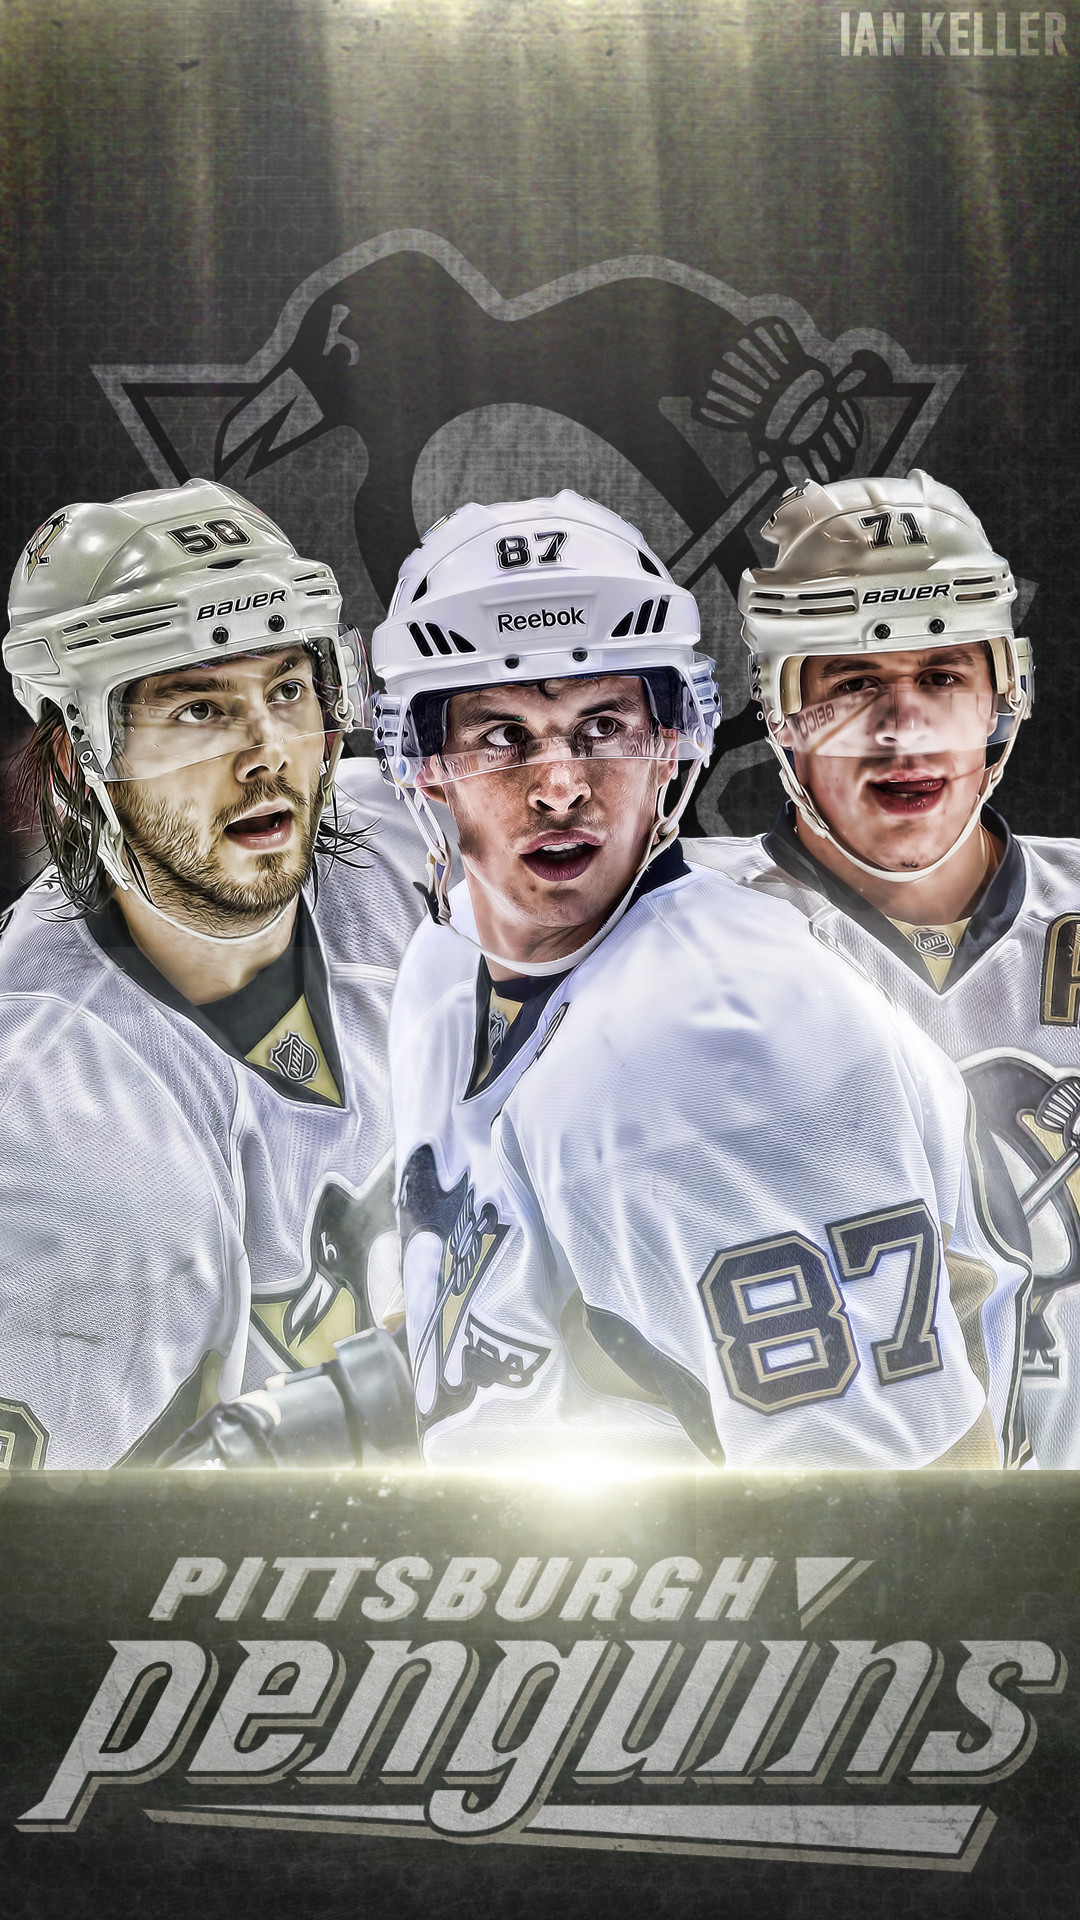 1080x1920 Pittsburgh Penguins Phone Wallpaper by IanKeller Pittsburgh Penguins Phone  Wallpaper by IanKeller